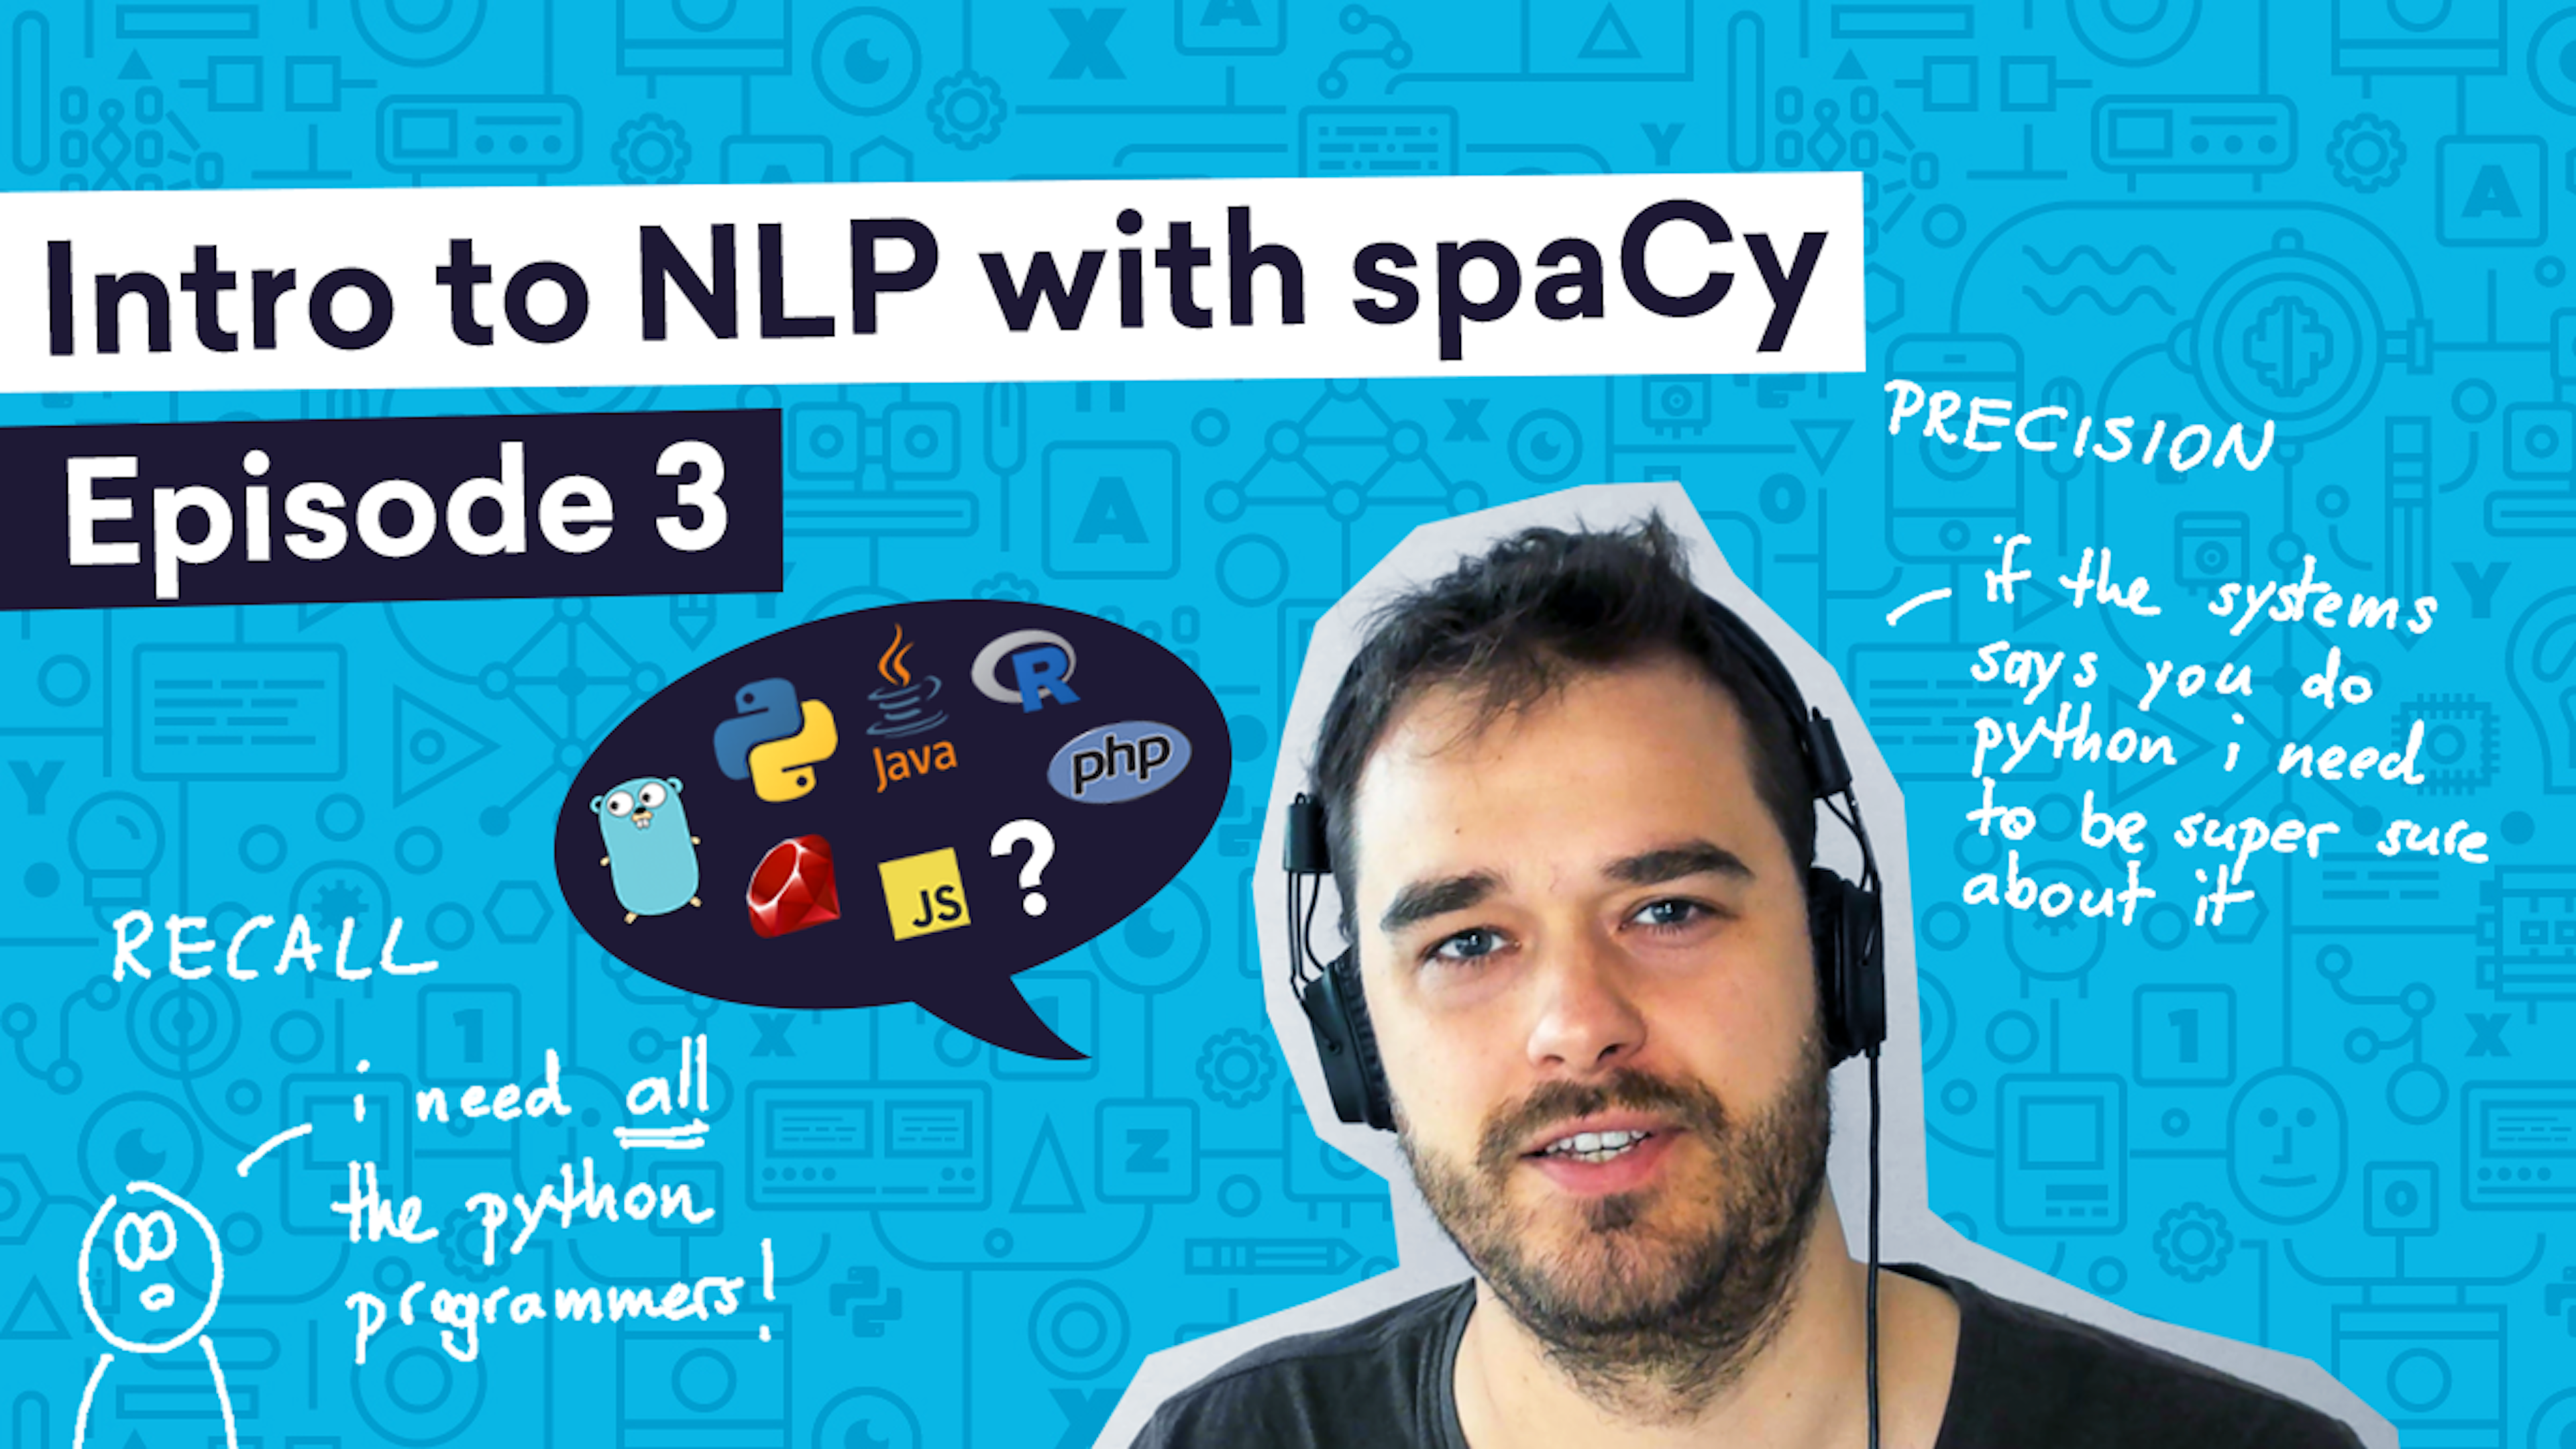 Intro to NLP with spaCy (3): Detecting programming languages